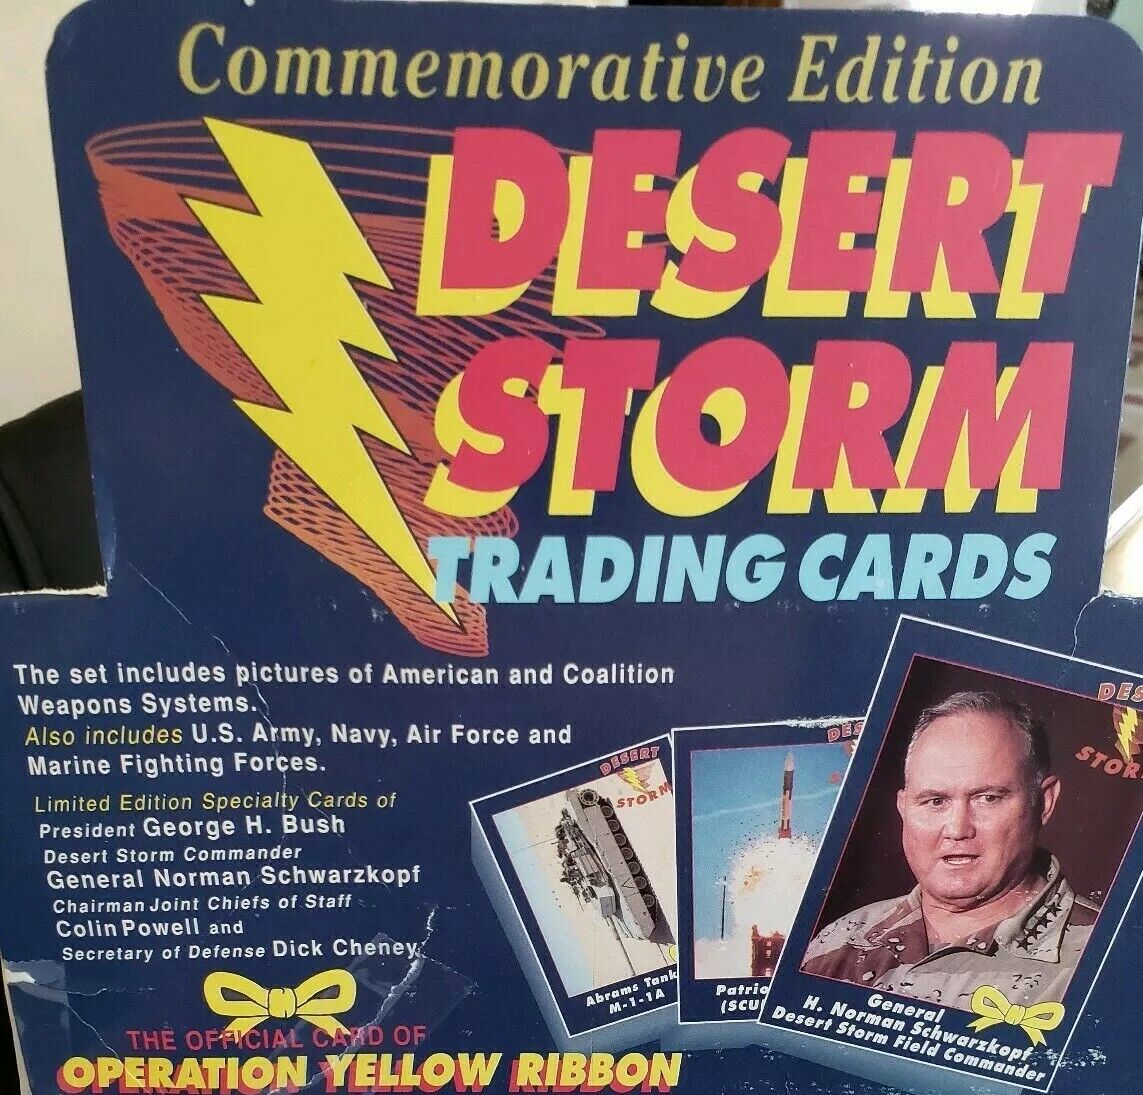 New Desert Storm Trading Cards,Operation yellow ribbon Commemorative Edition